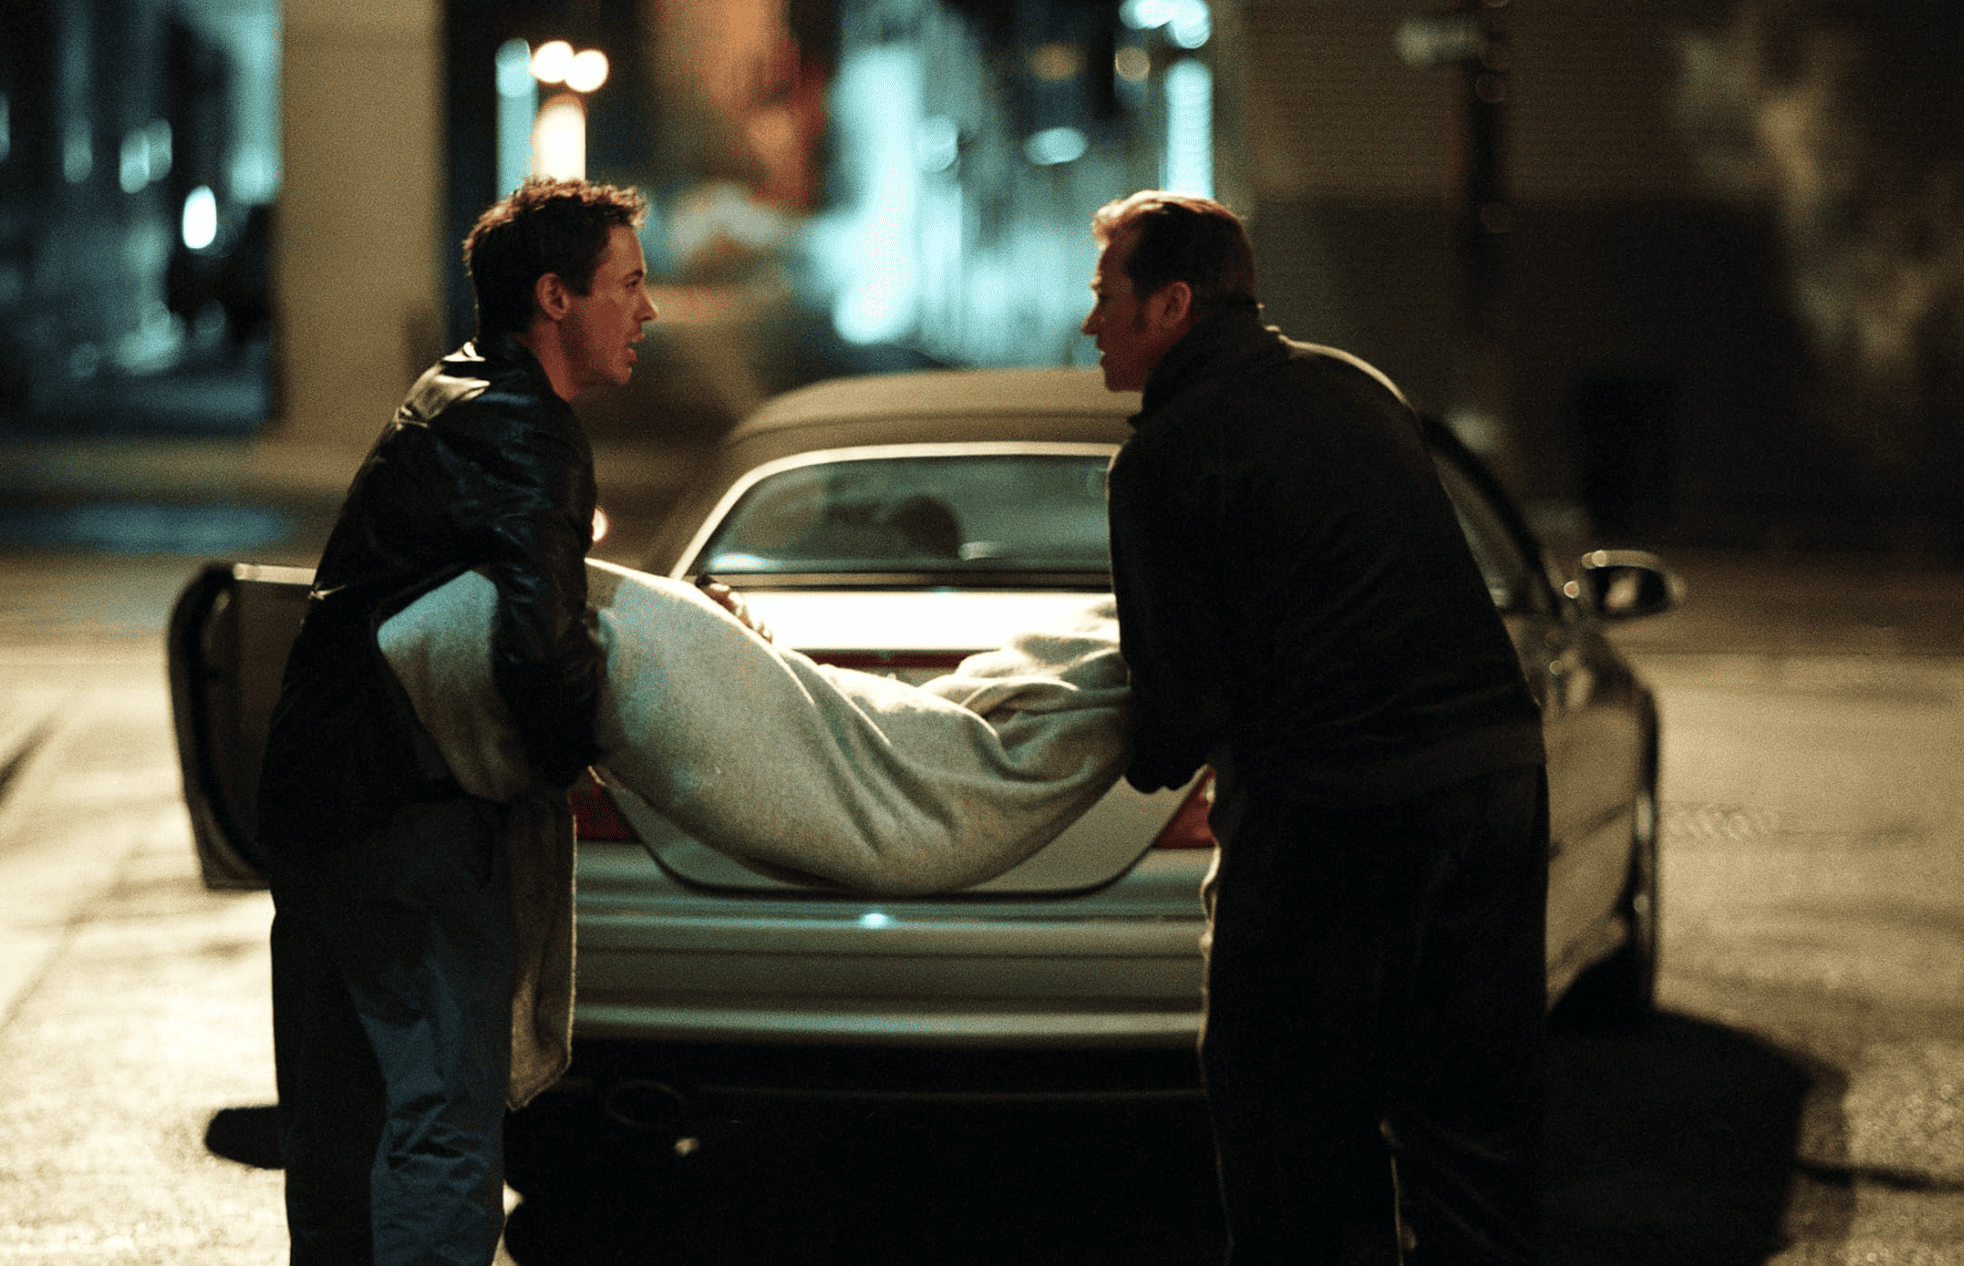 Two men argue as they carry a body wrapped in fabric towards a car in this image from Warner Bros.